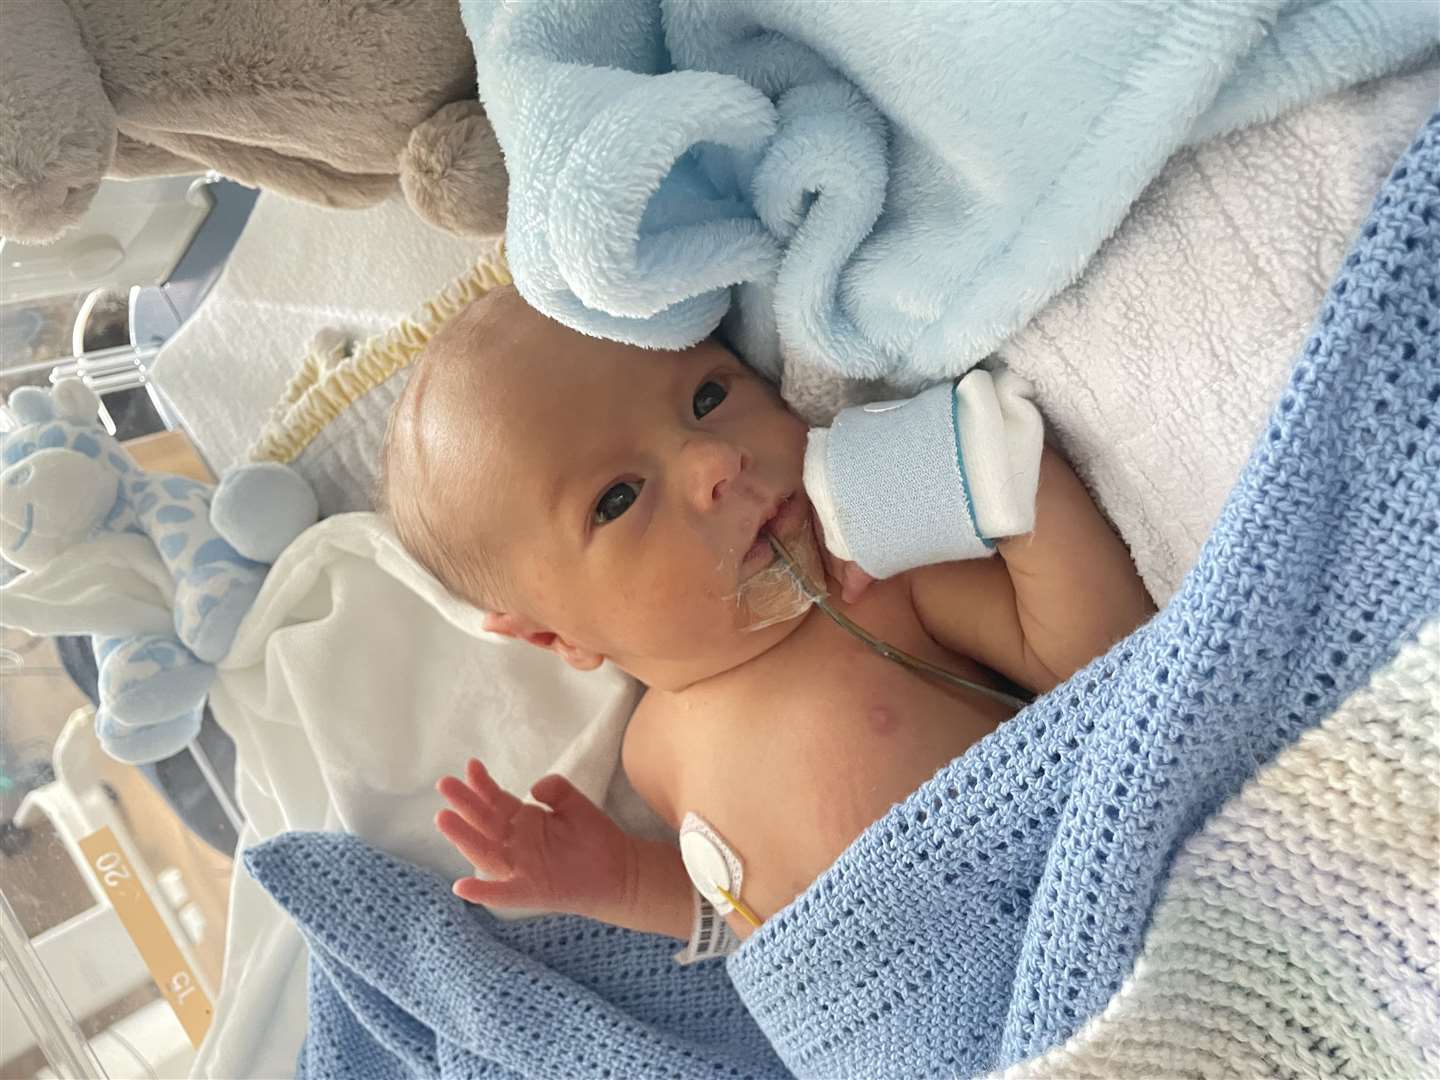 Lenny is now at the Evelina Children's Hospital in London